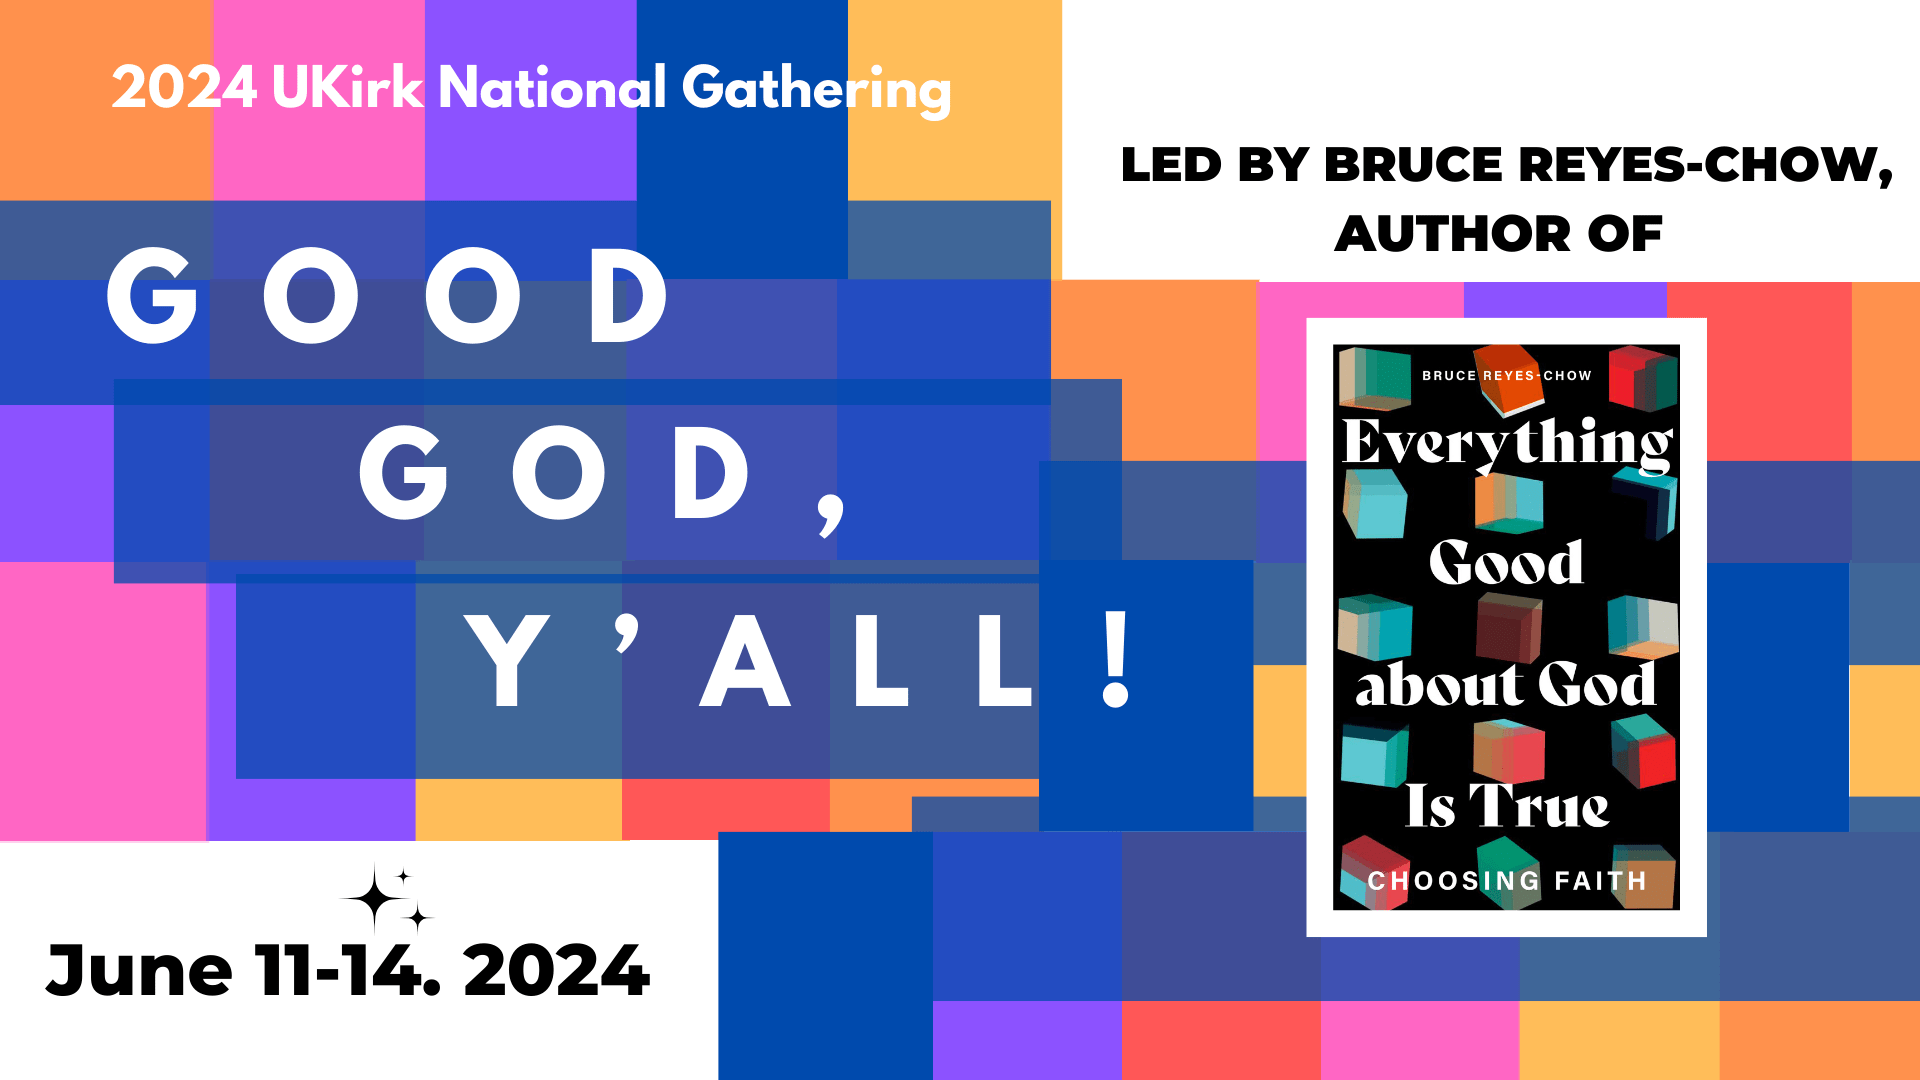 Save the Date for the 2024 UKirk National Gathering!